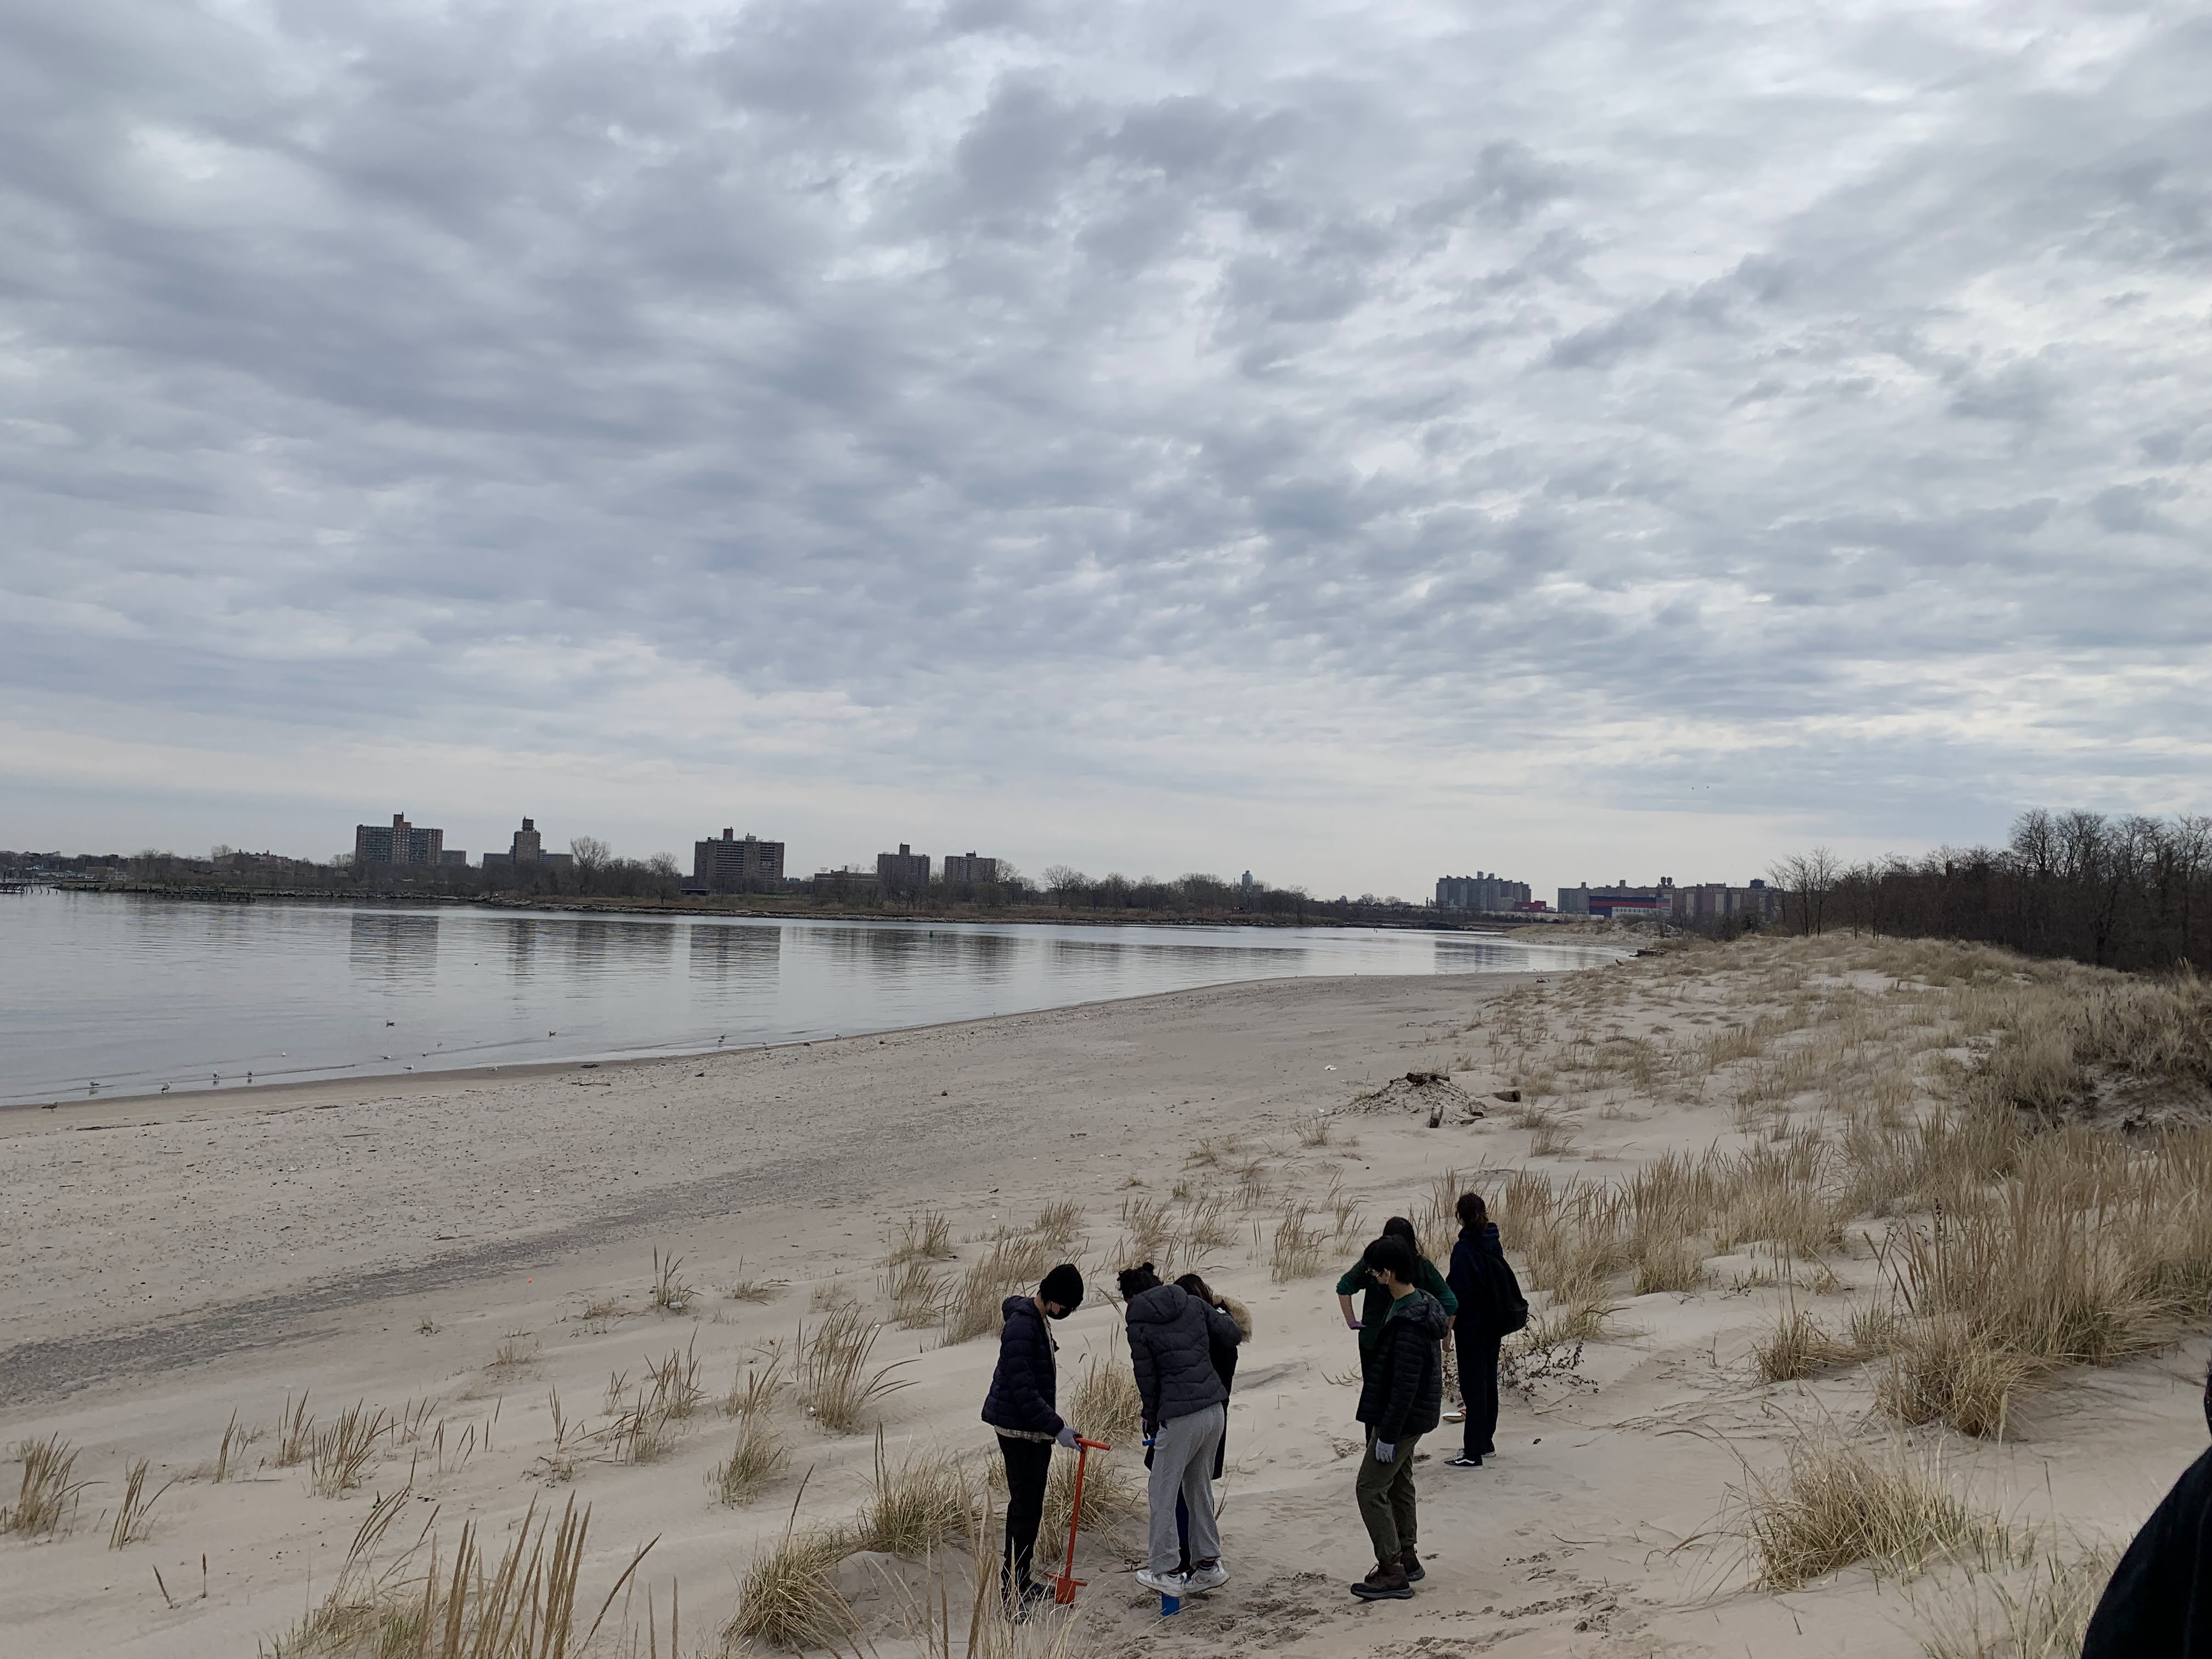 People stand on a sandy beach looking down at American beachgrass planting, with some buildings in the distance. 